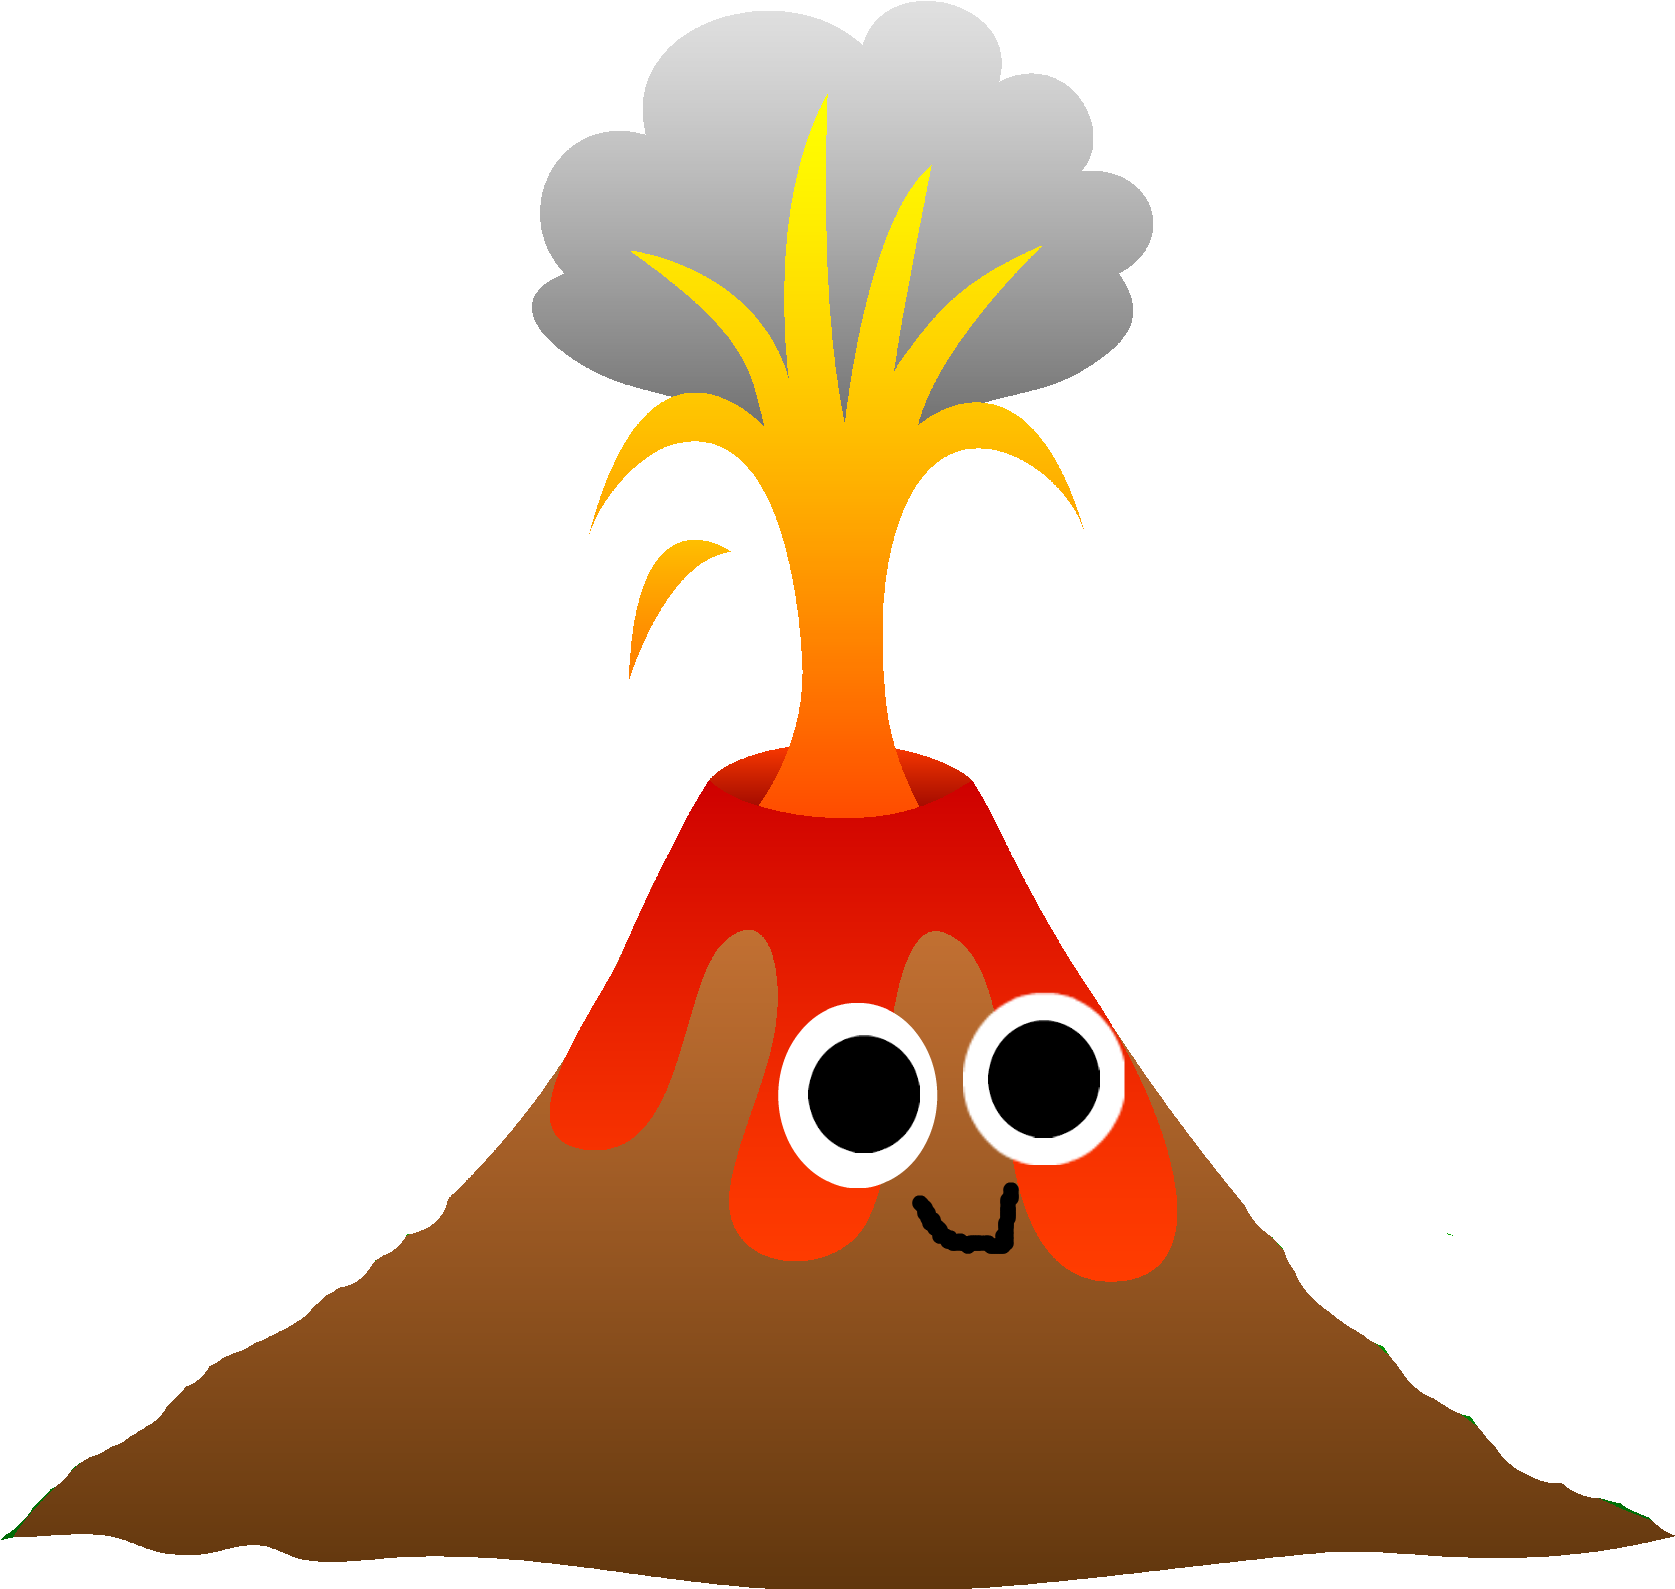 380 3804770 eruption drawing at getdrawings com free for cartoon